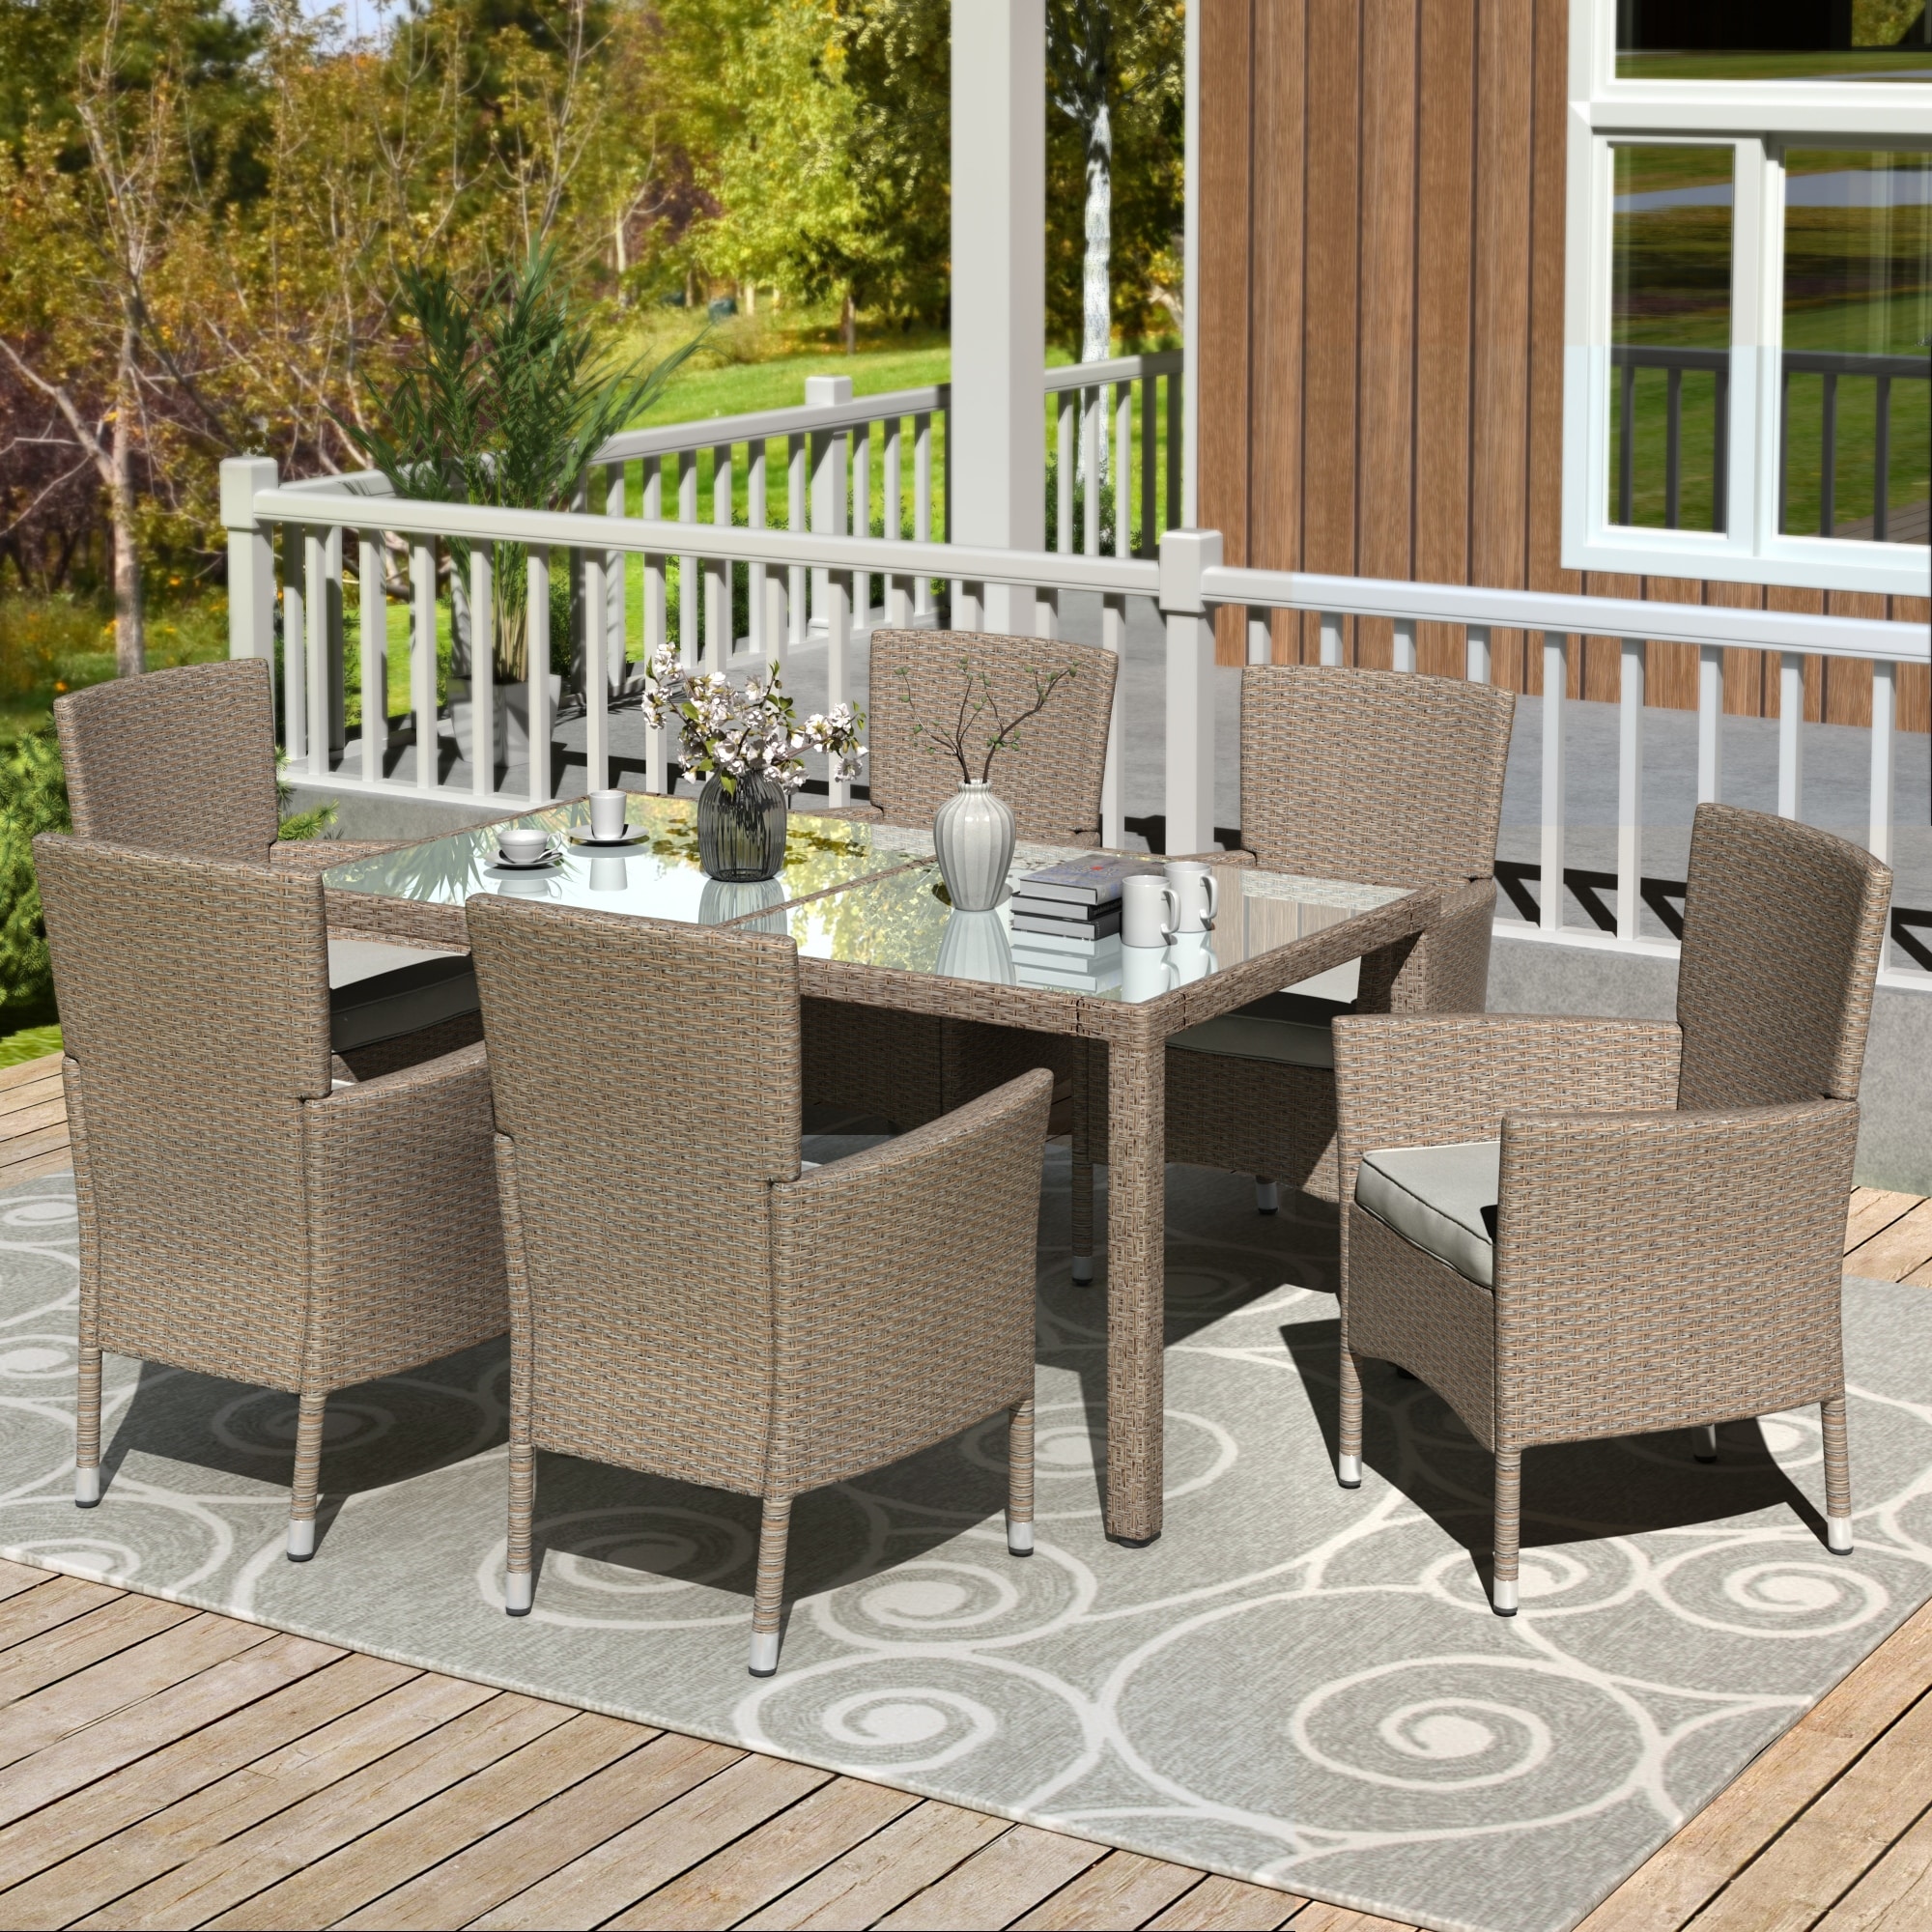 Outdoor Wicker 7 Piece Dining Set With Beige Cushions And Table